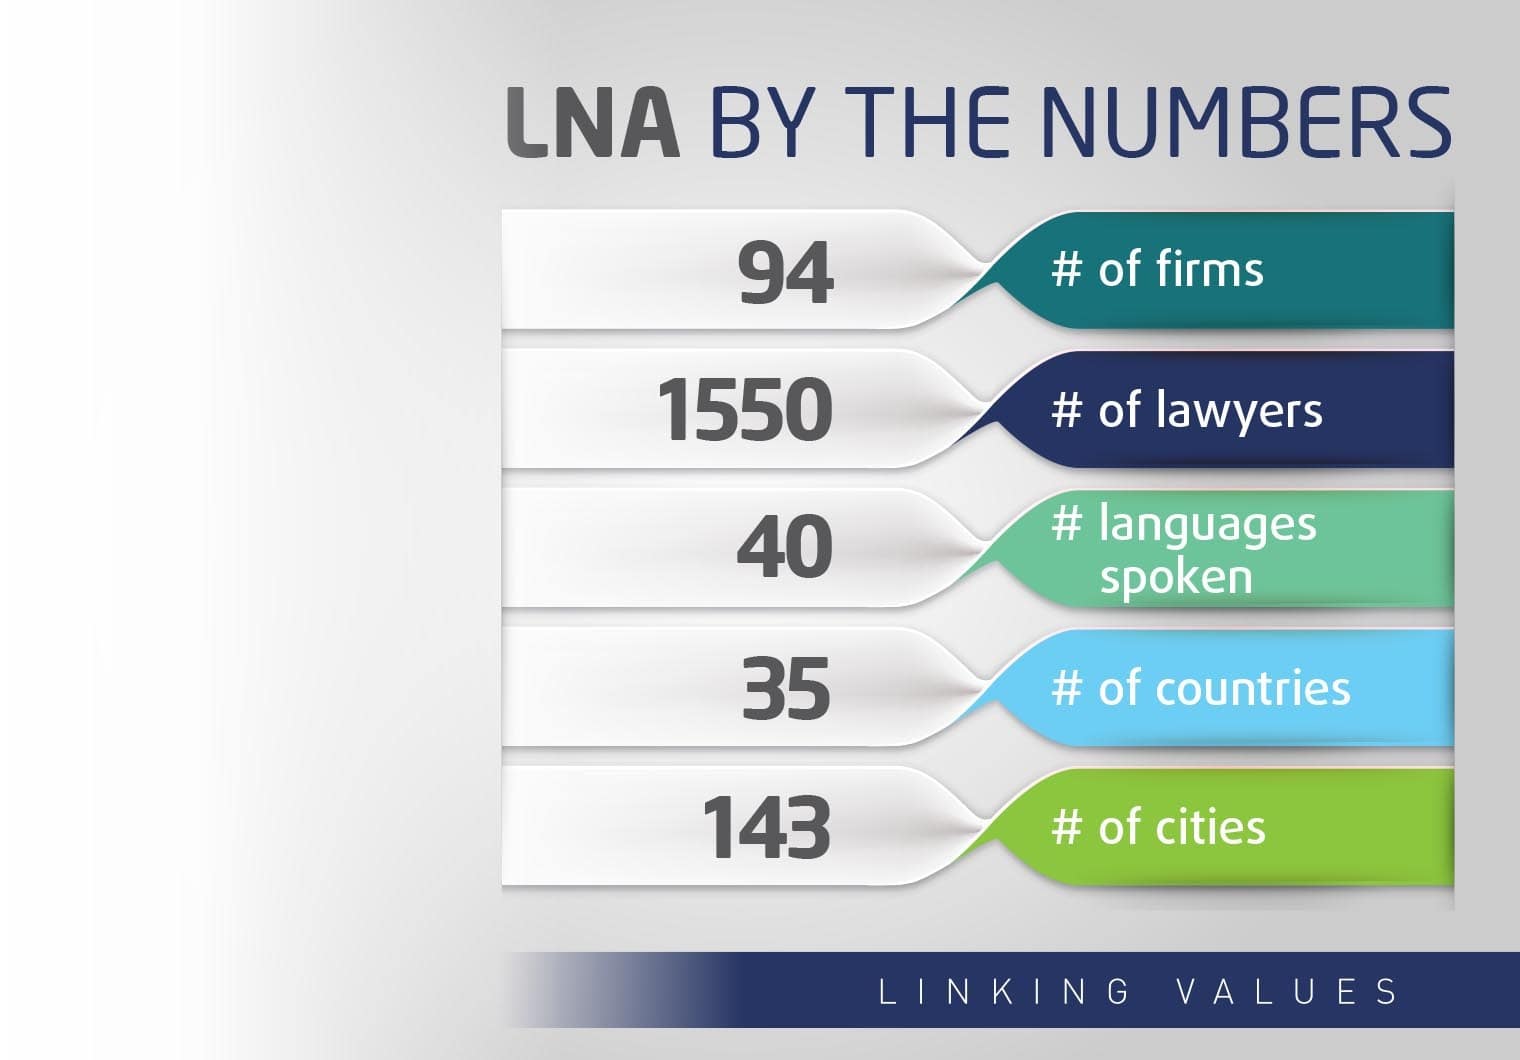 LNA by the numbers: 94 firms, 1550 layers, 40 languages spoken, 35 countries, 143 cities